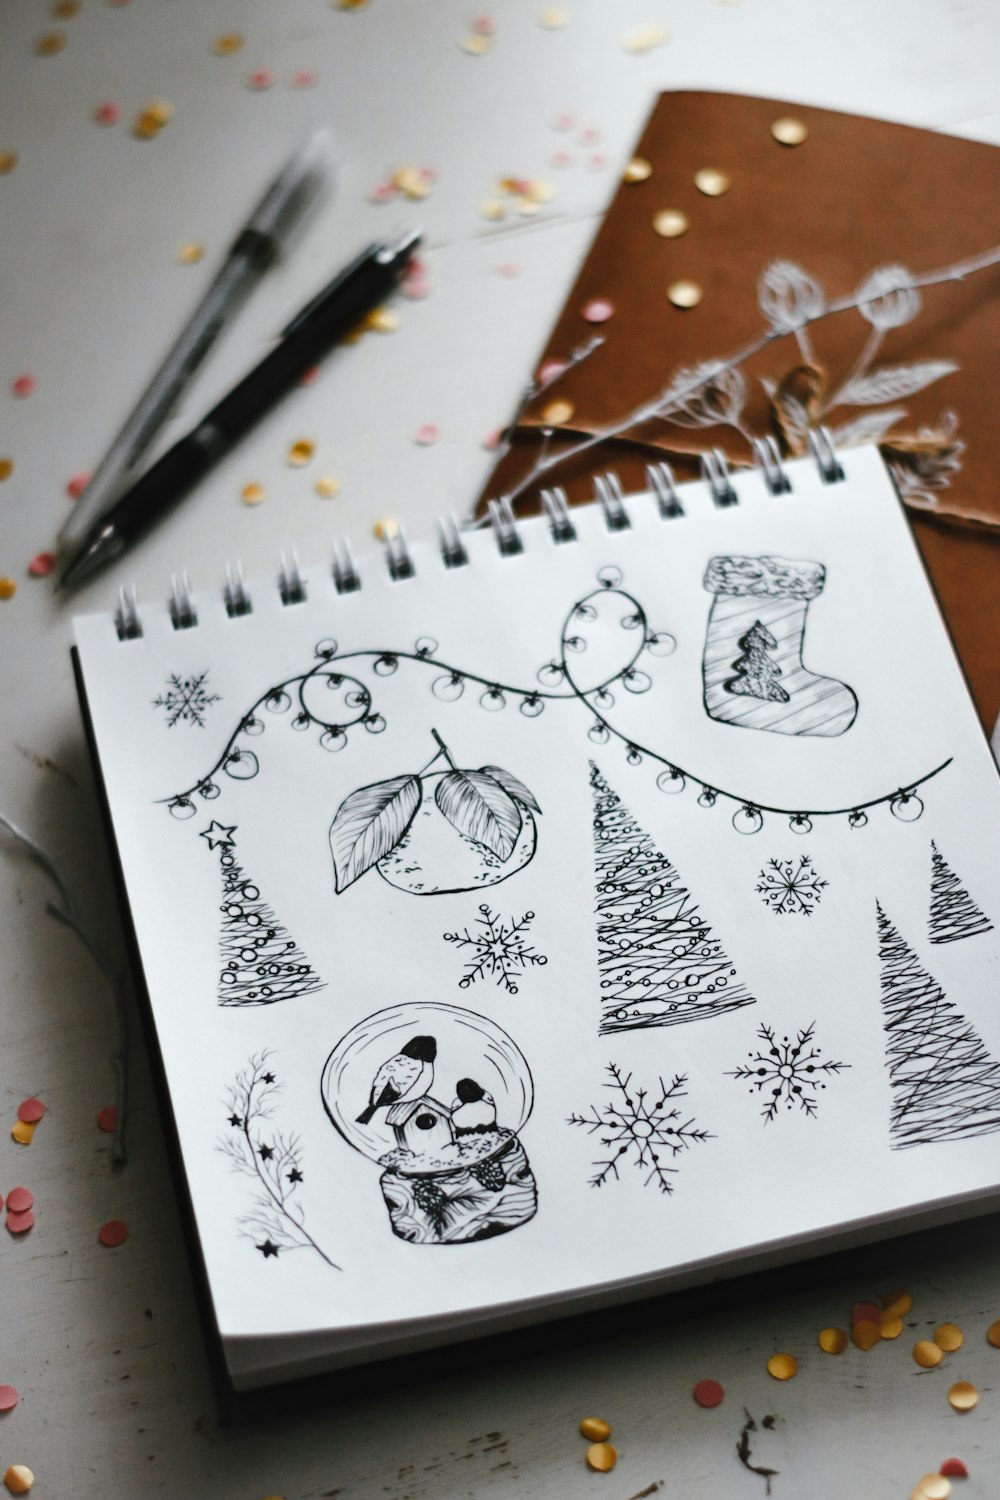 white and black sketch on white paper photo – Free Drawing Image on Unsplash